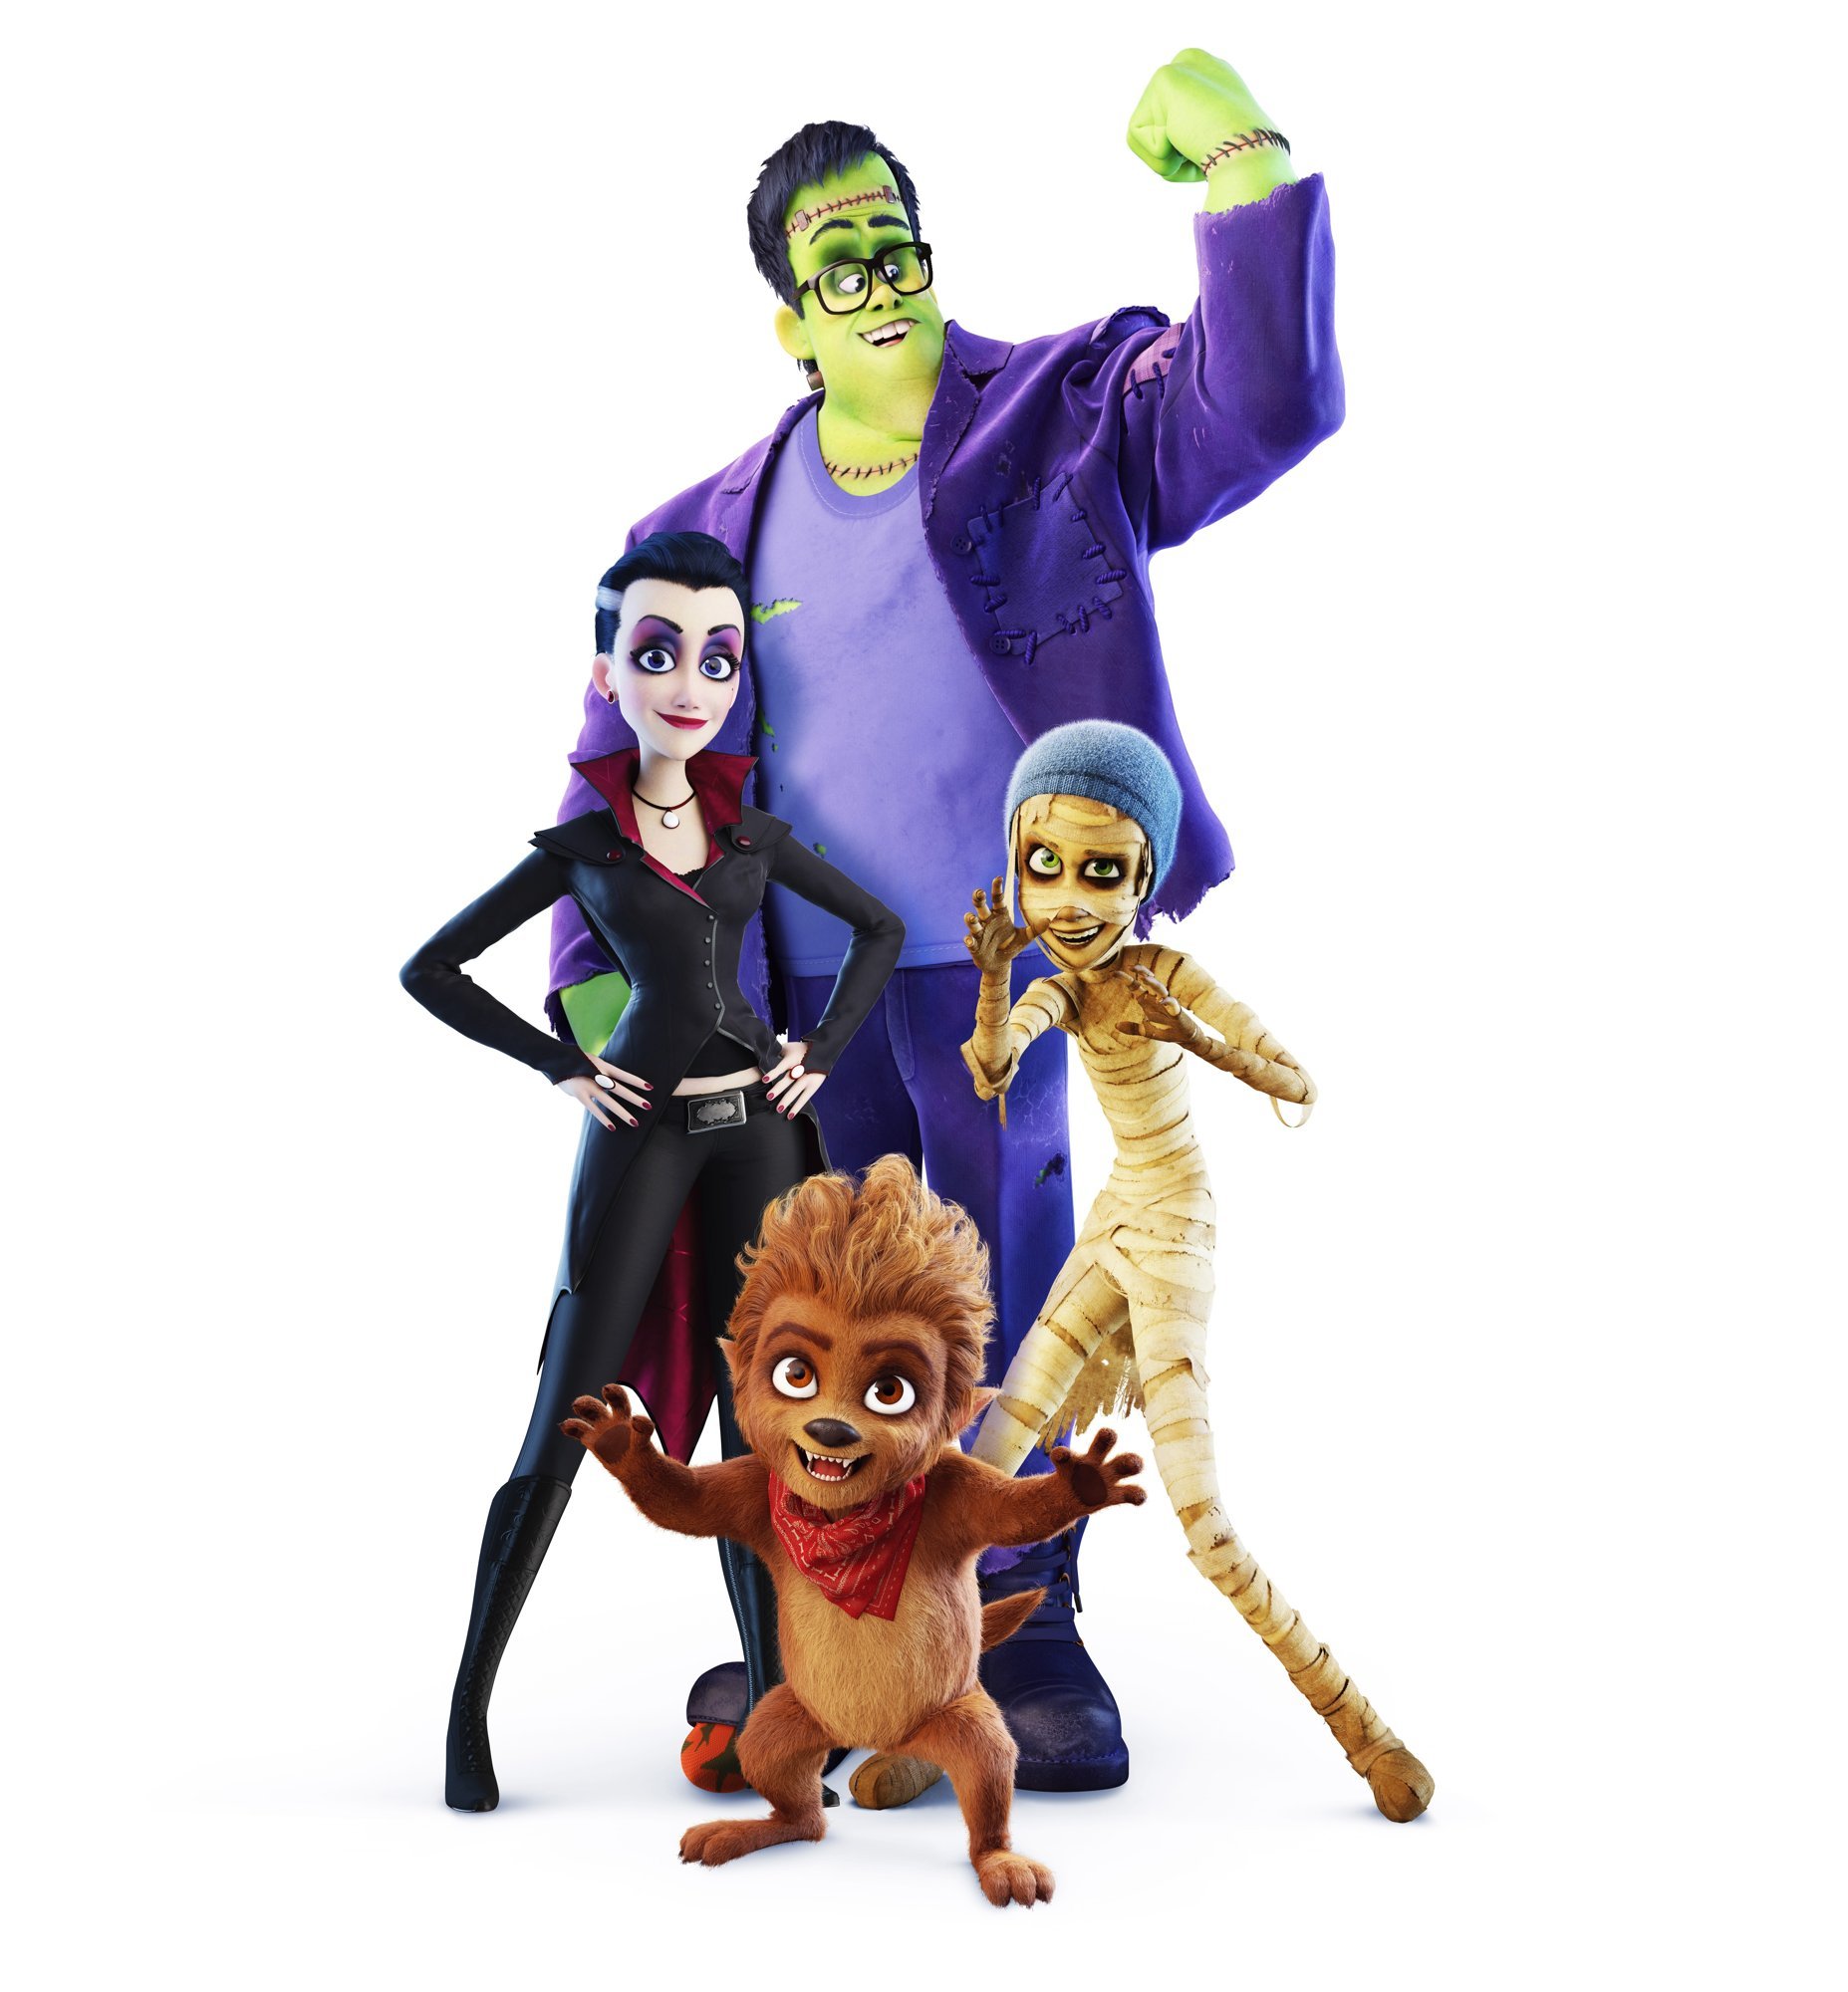 Frank, Emma, Fay and Max in Viva Pictures' Monster Family (2018)